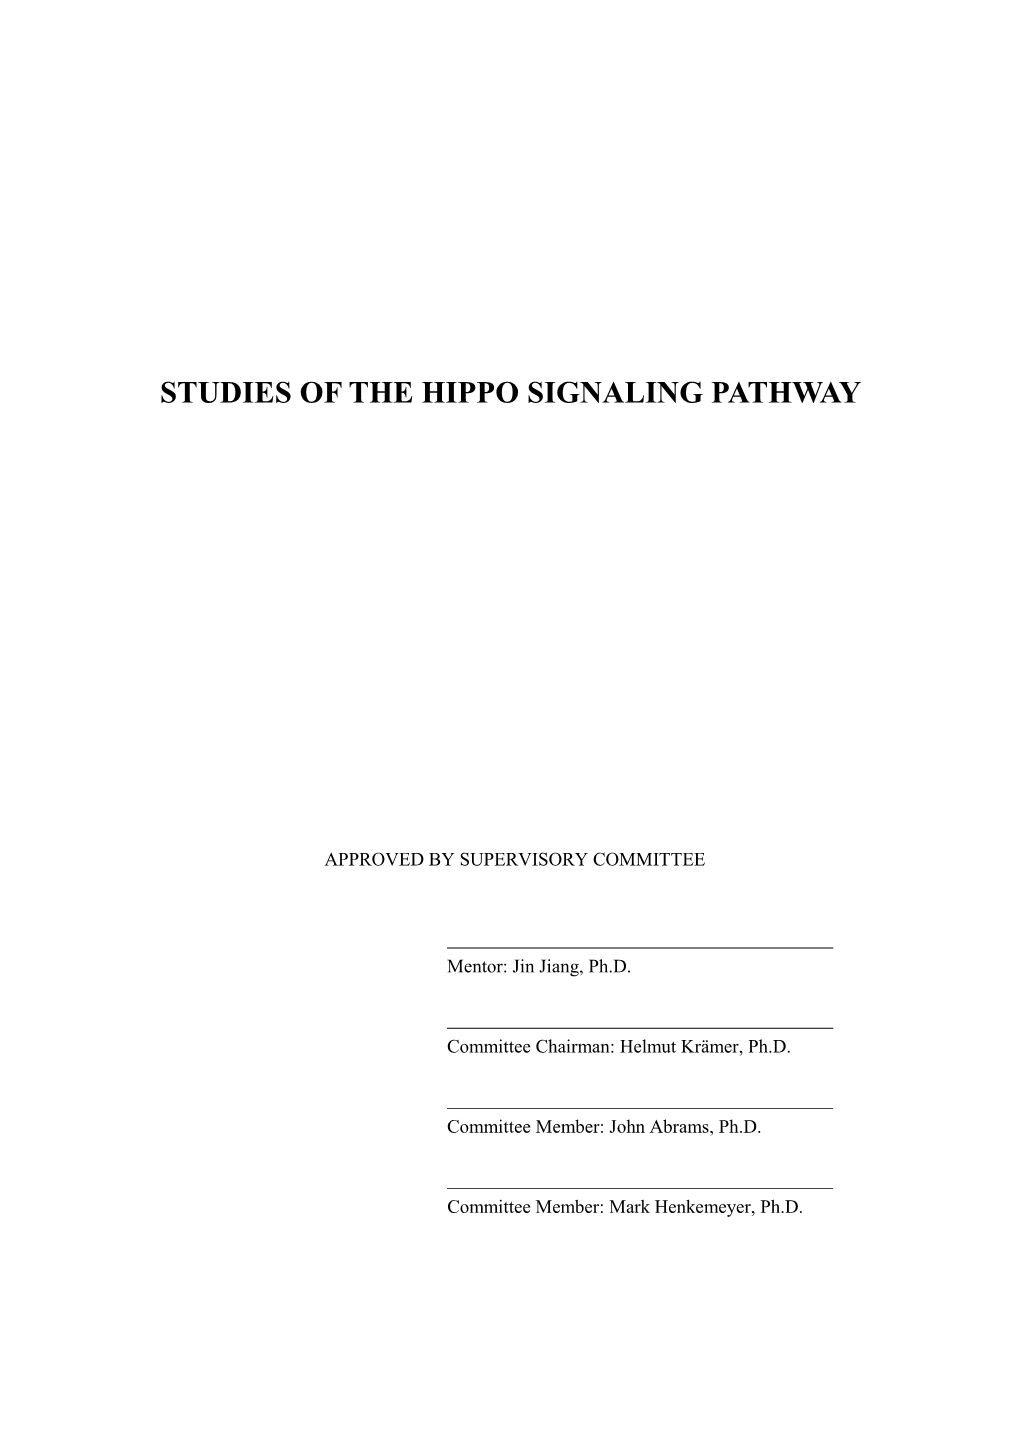 Studies of the Hippo Signaling Pathway